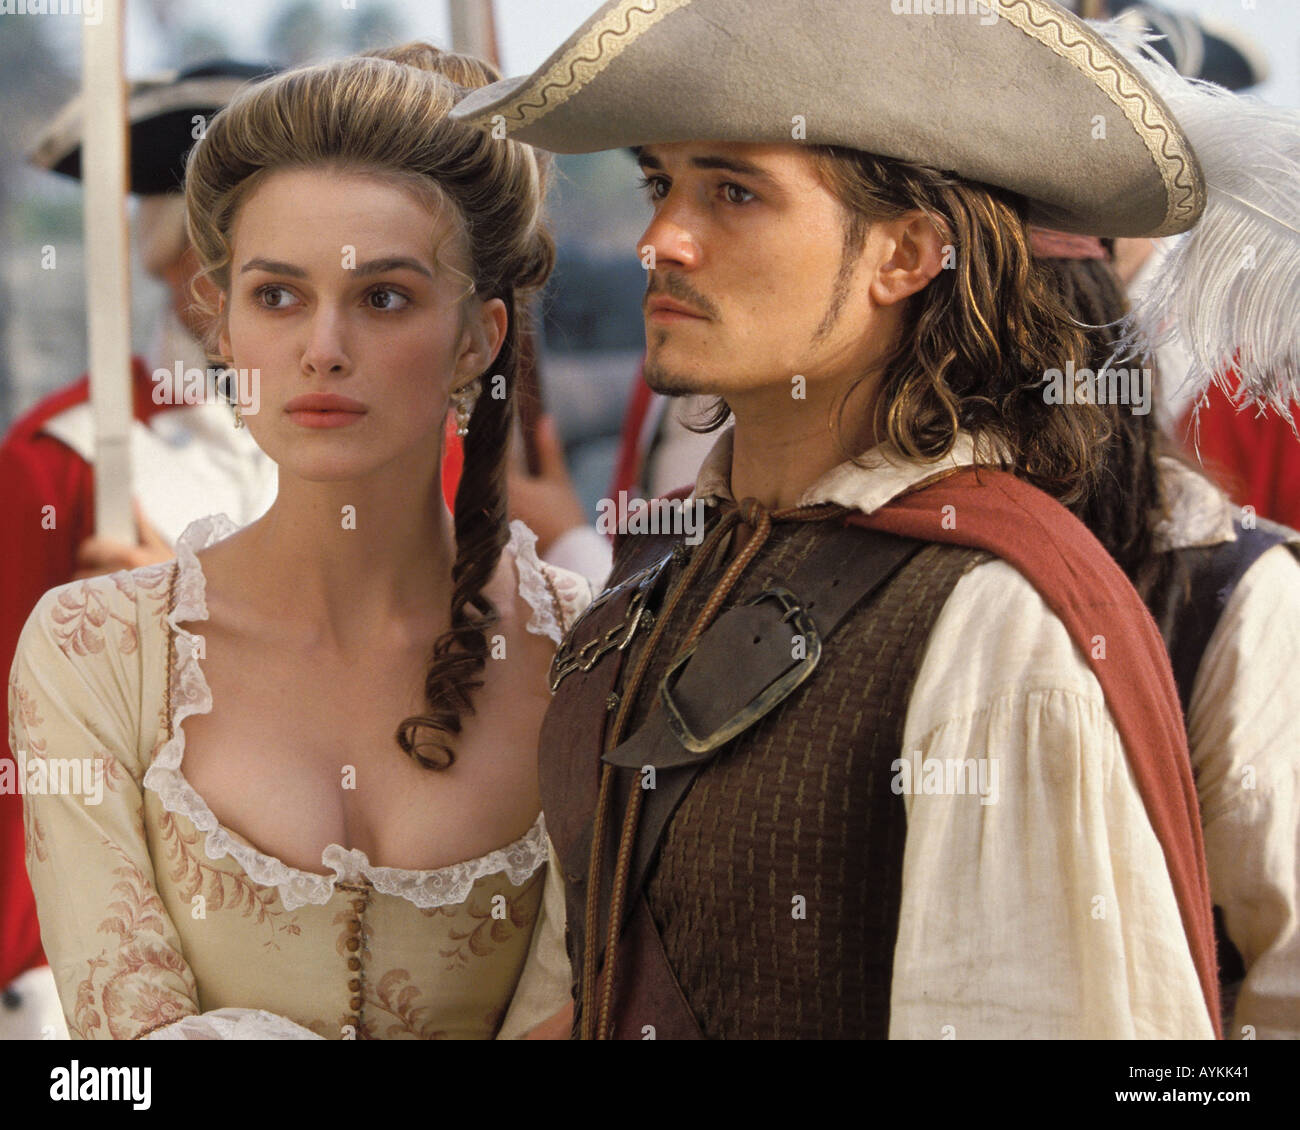 Pirates Of The Caribbean Curse Of The Black Pearl 03 Film With Keira Knightley And Orlando Bloom From Buena Vista Walt Disney Stock Photo Alamy